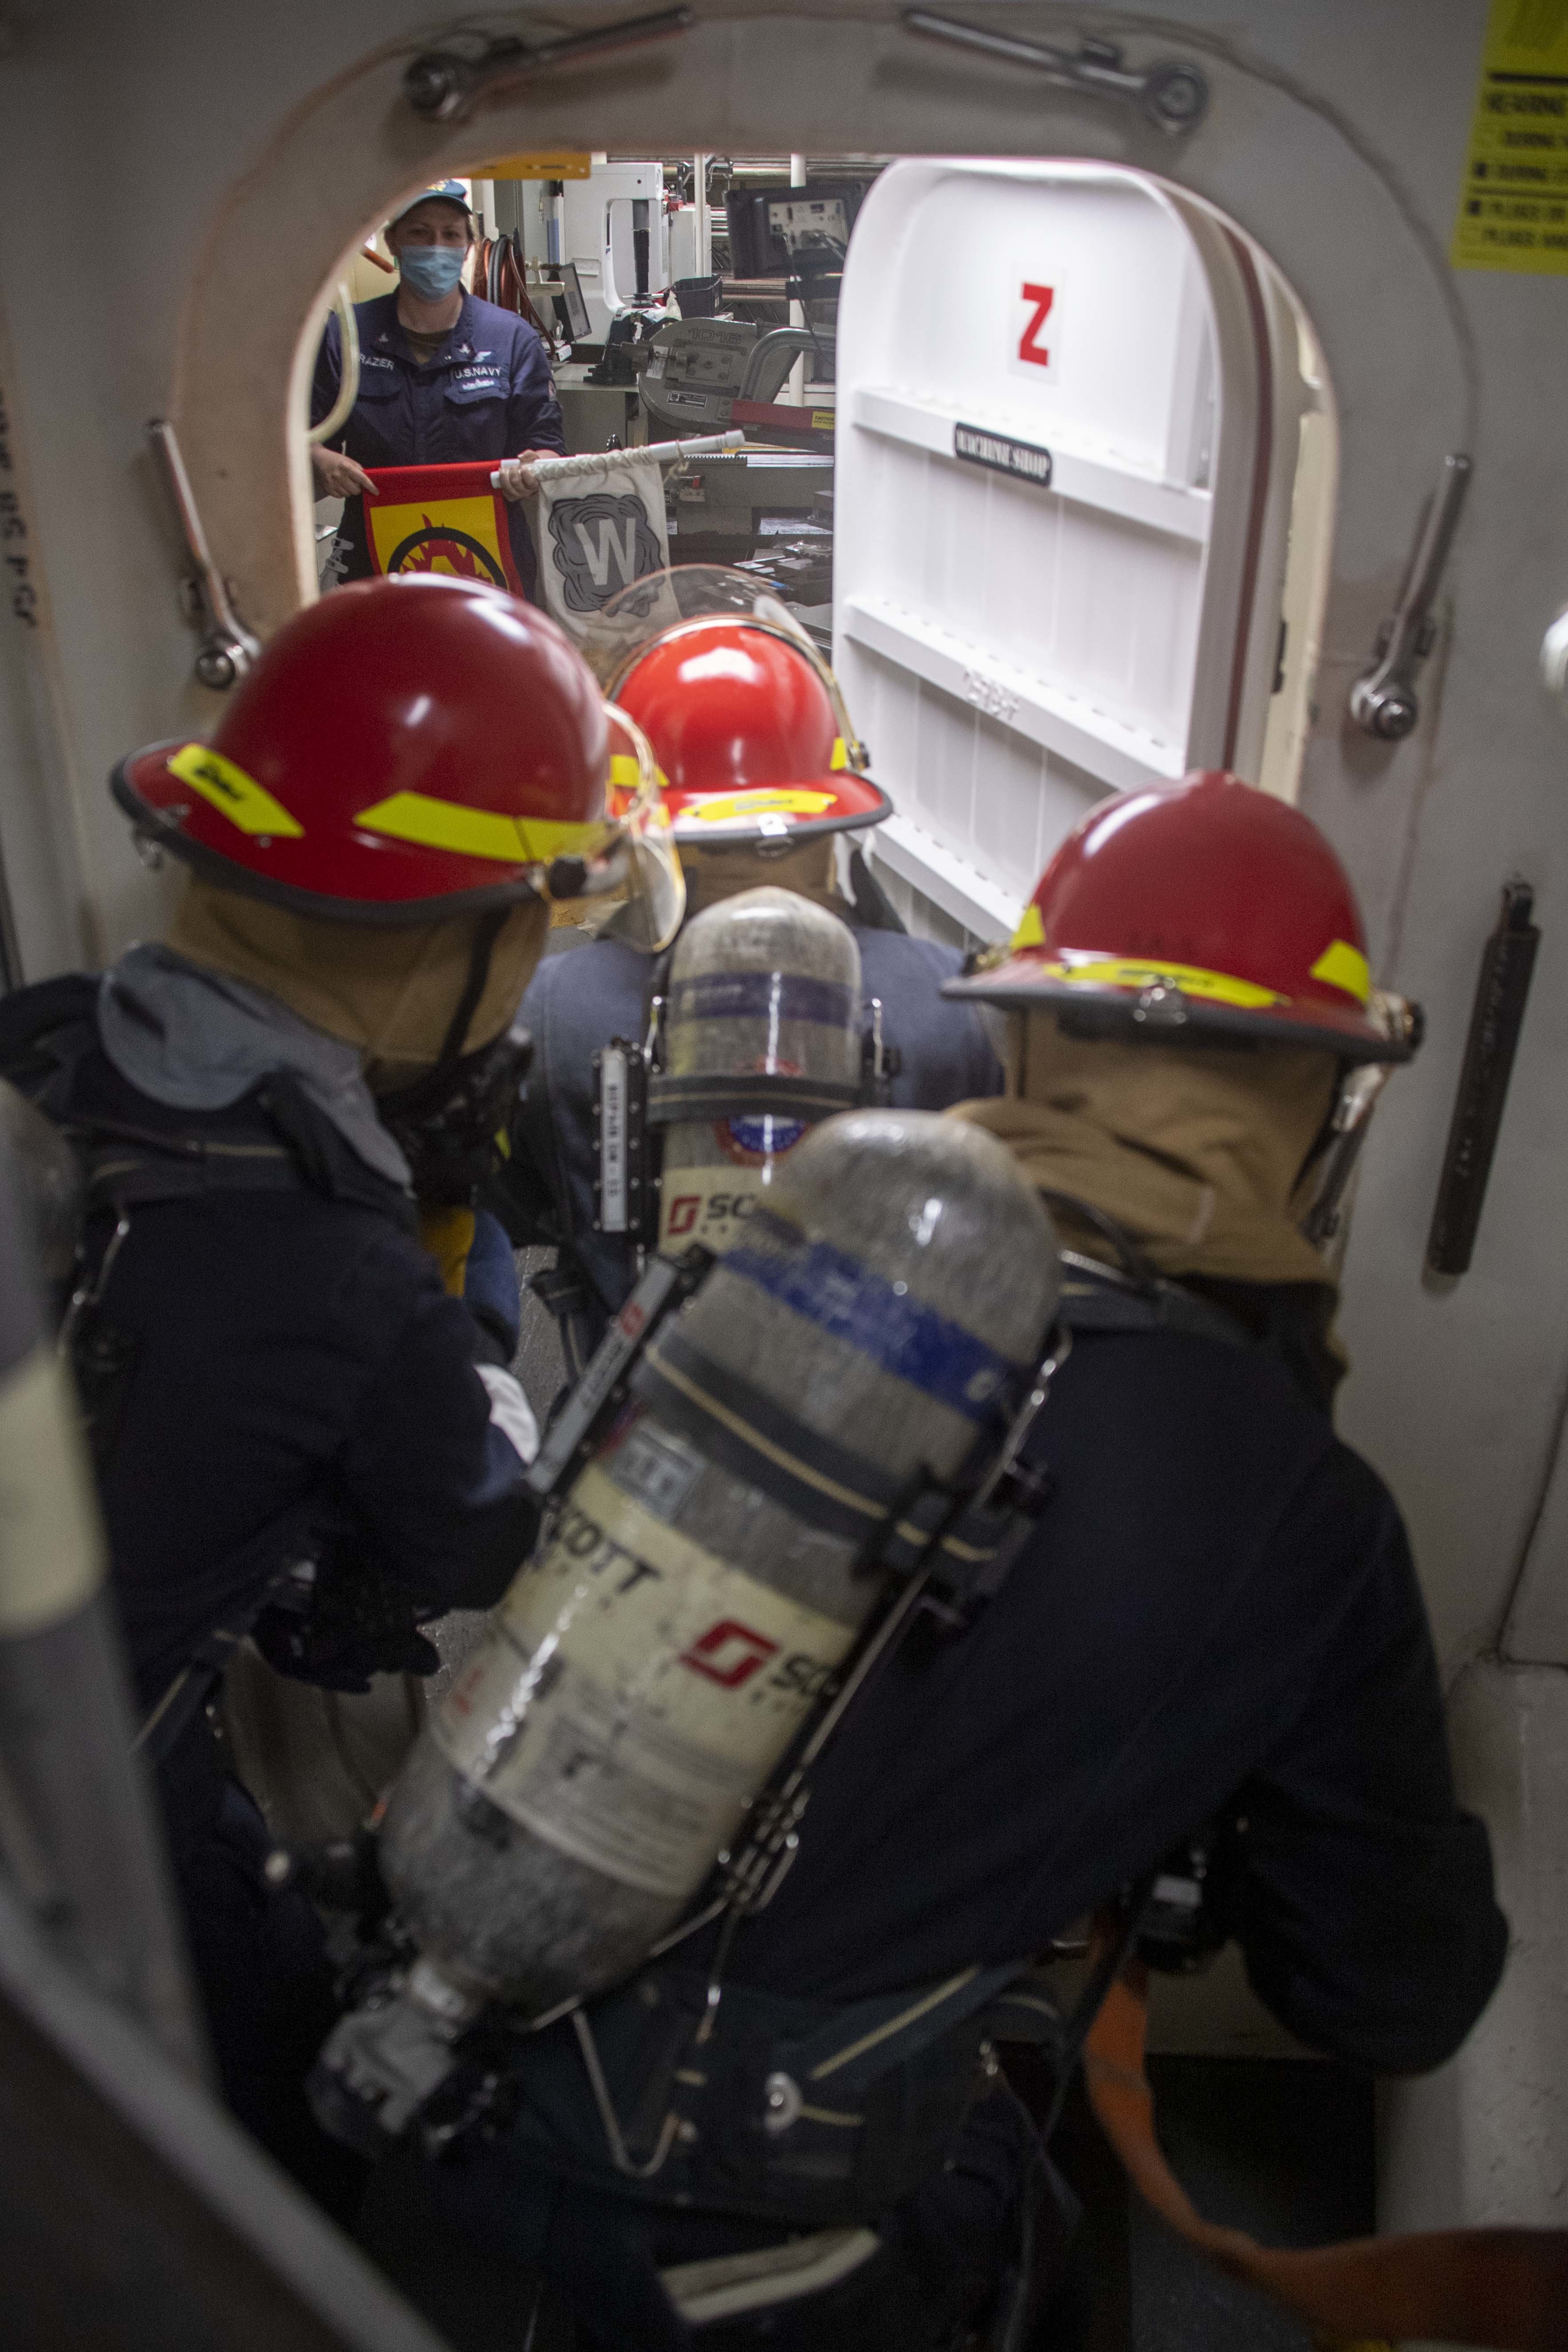 Hose team members enter a space during a simulated firefighting evolution onboard the forward-deployed amphibious assault ship USS America (LHA 6).